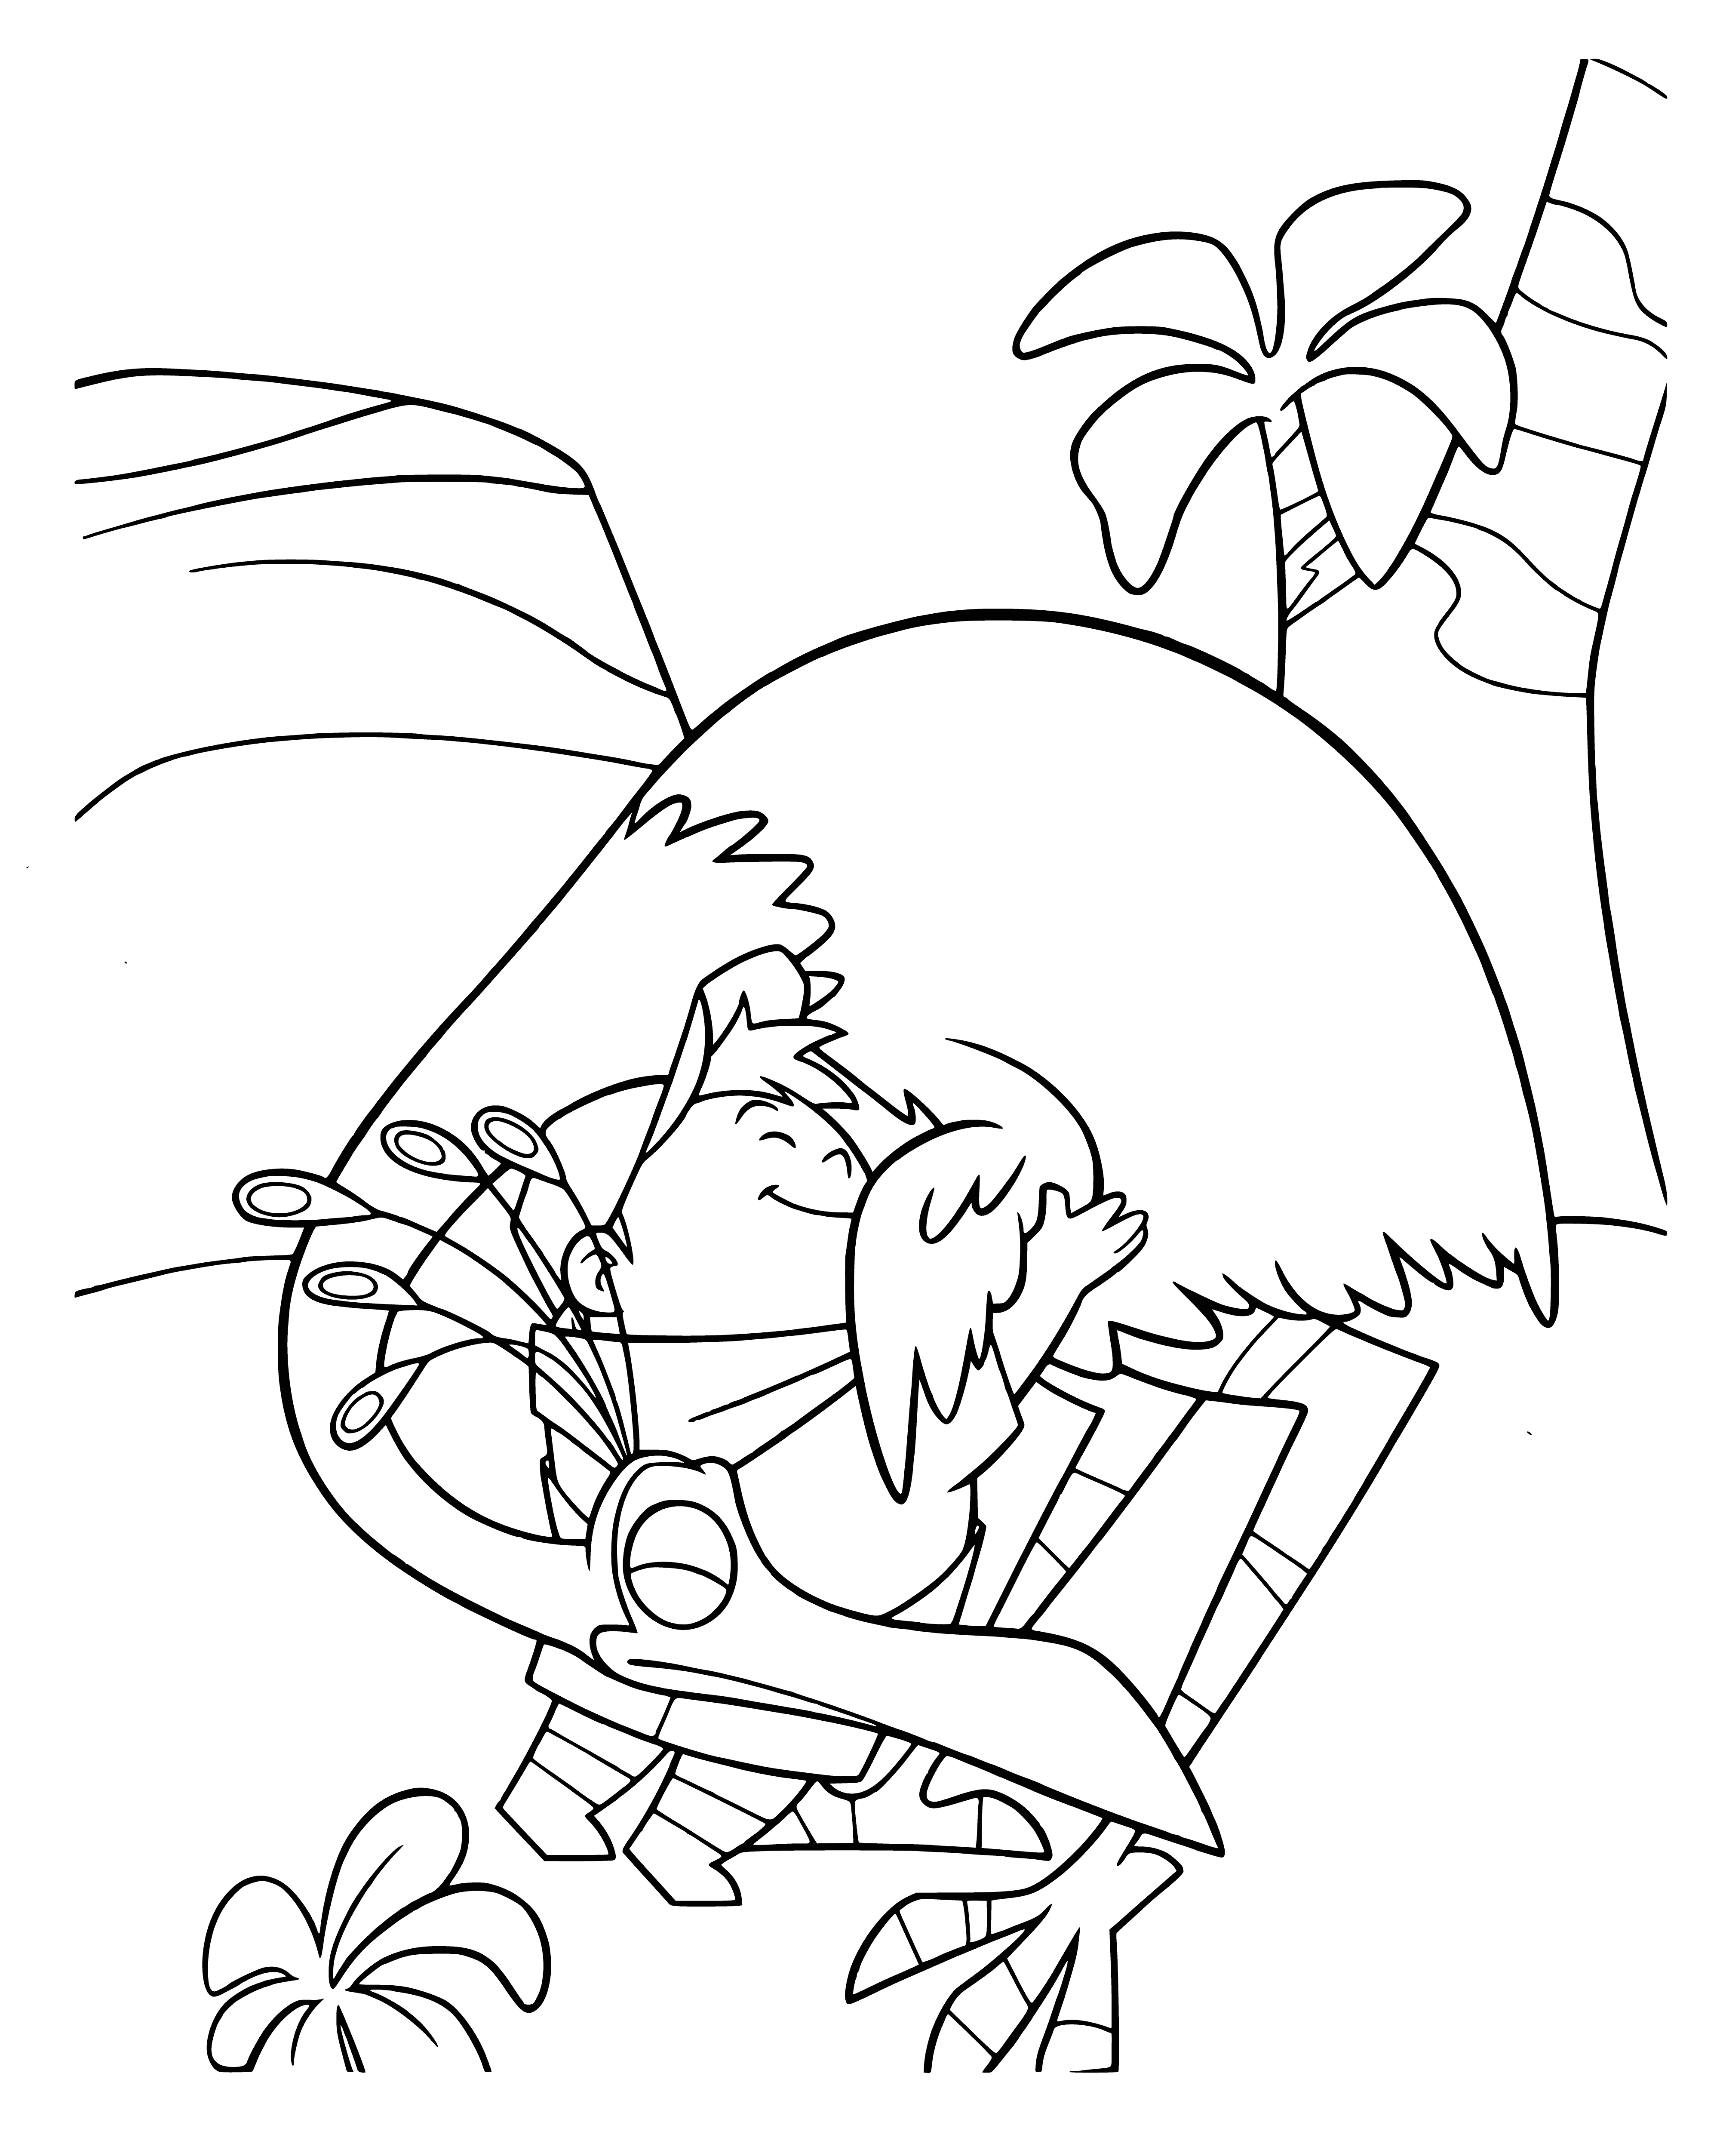 coloring page: Giant bird spreads wings with eyes wide and beak open, tongue out and body brown and white. Word "UP!" under it.